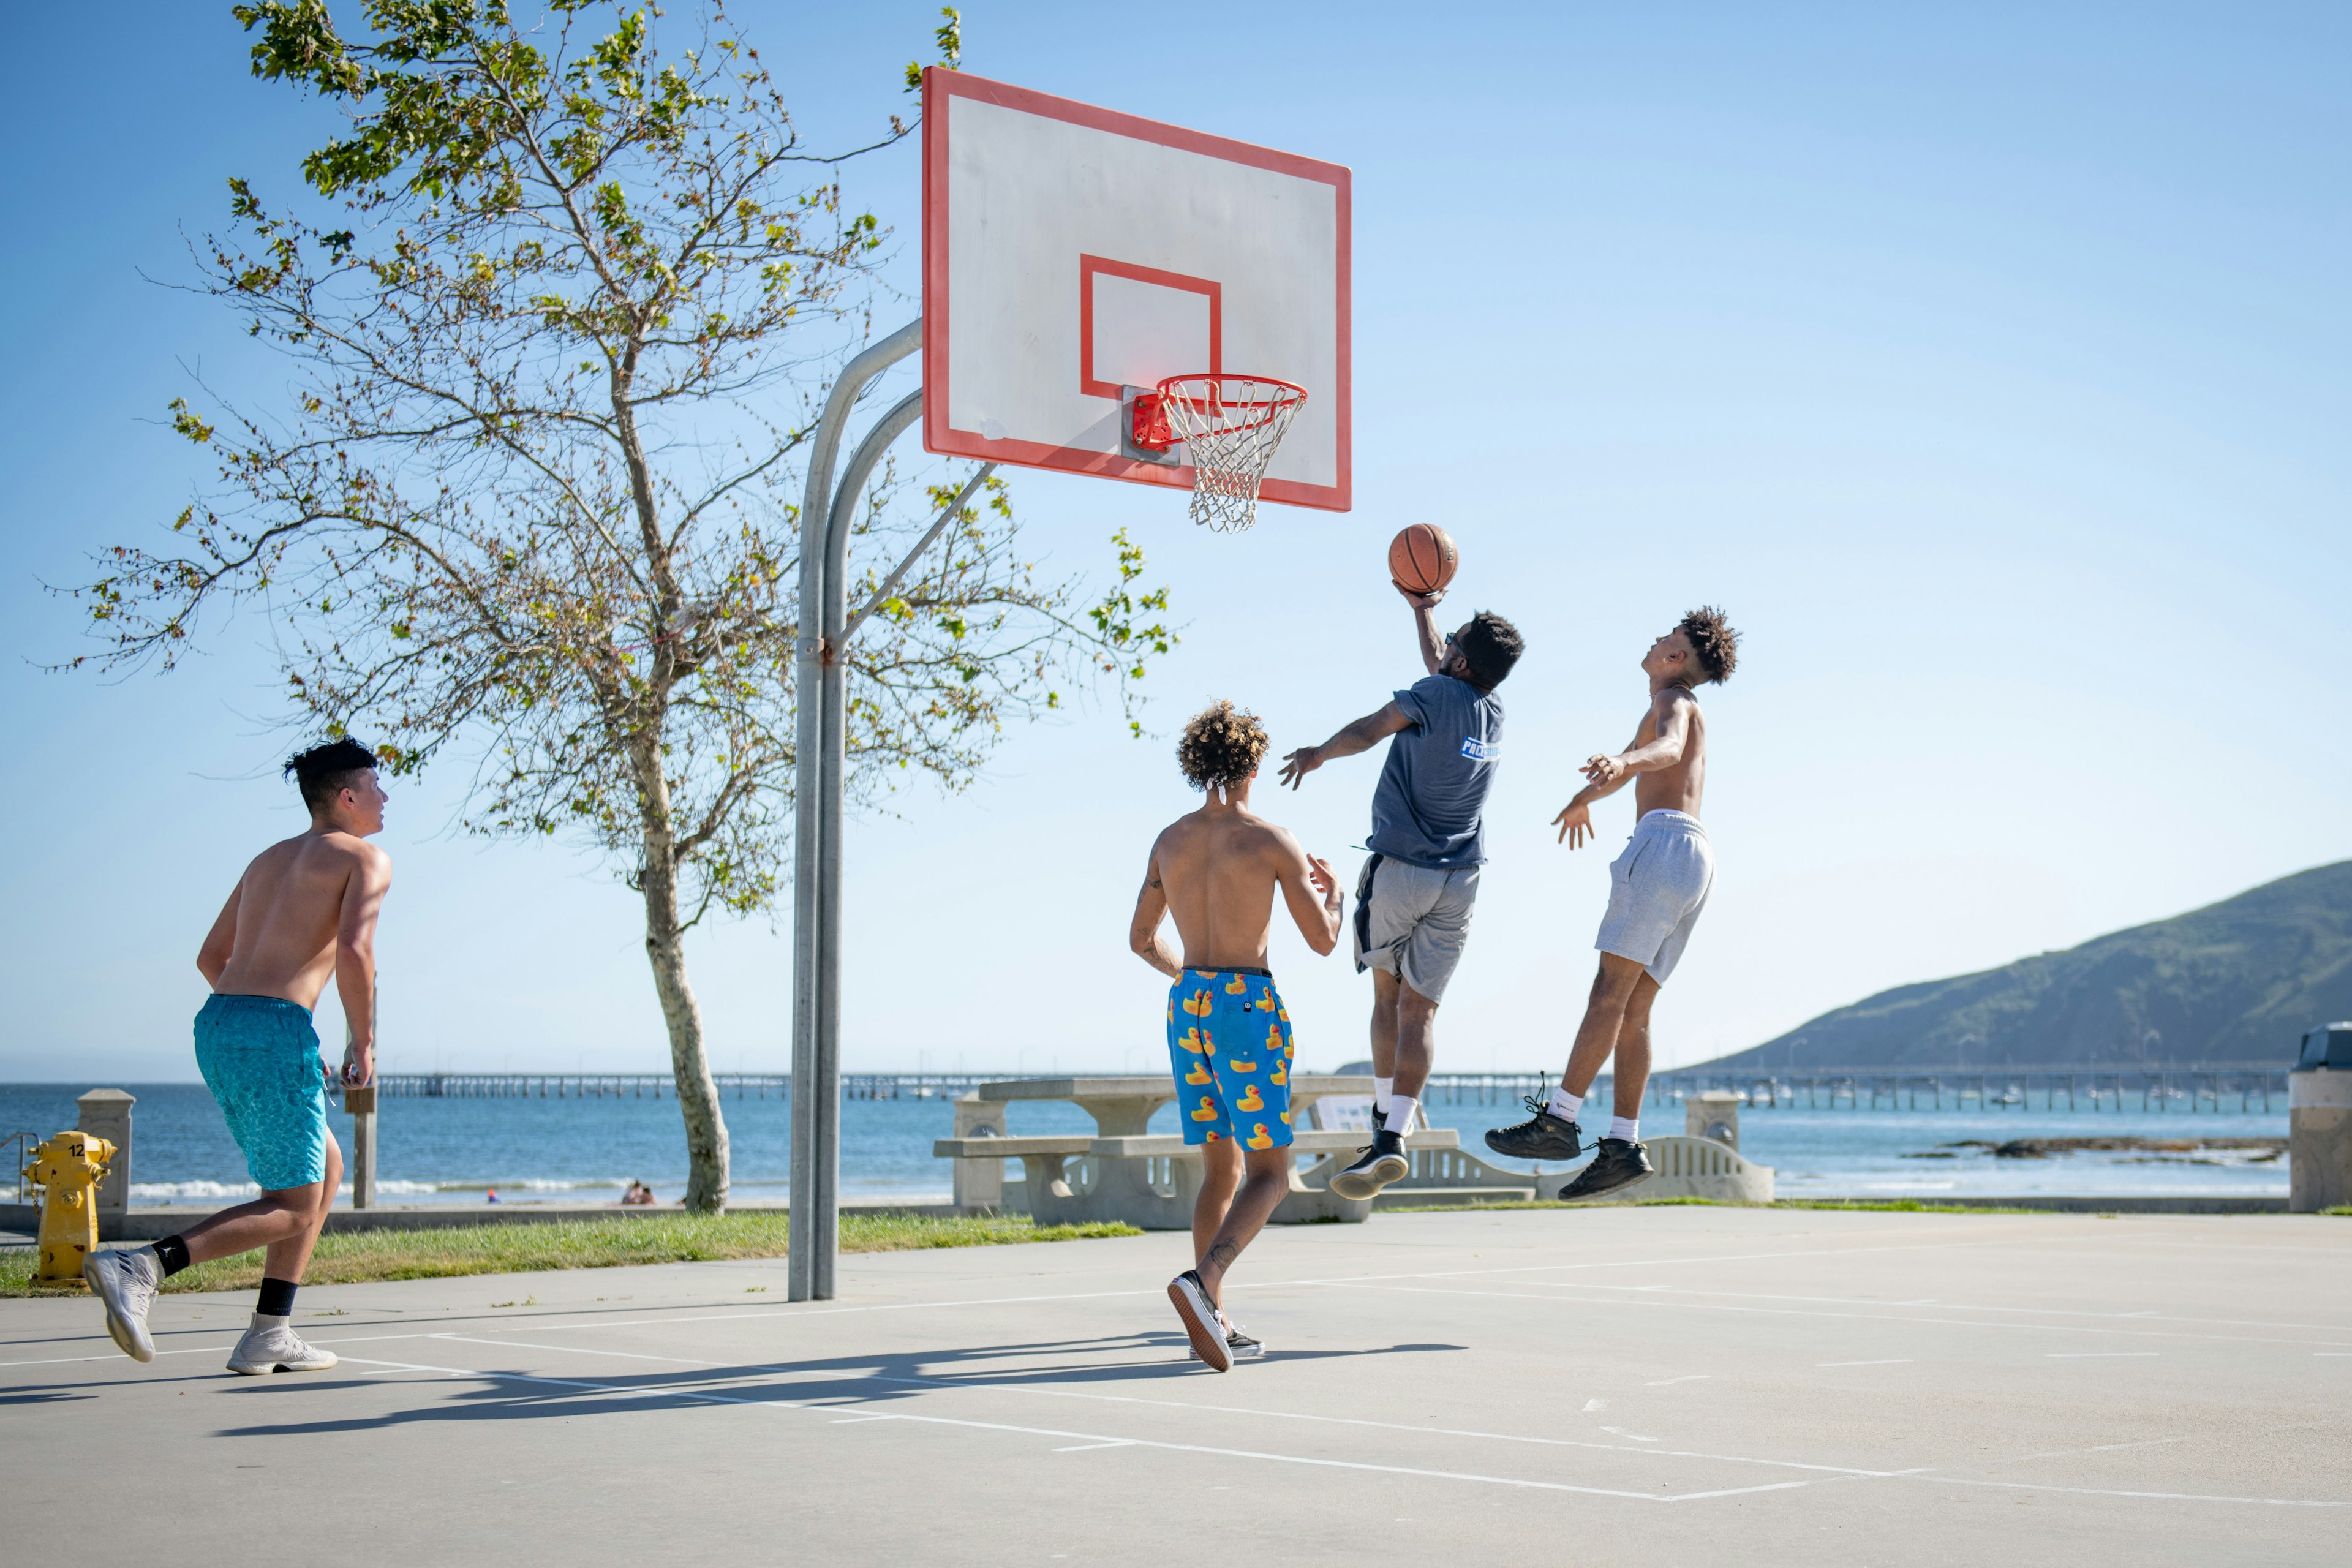 four people playing pick-up basketball